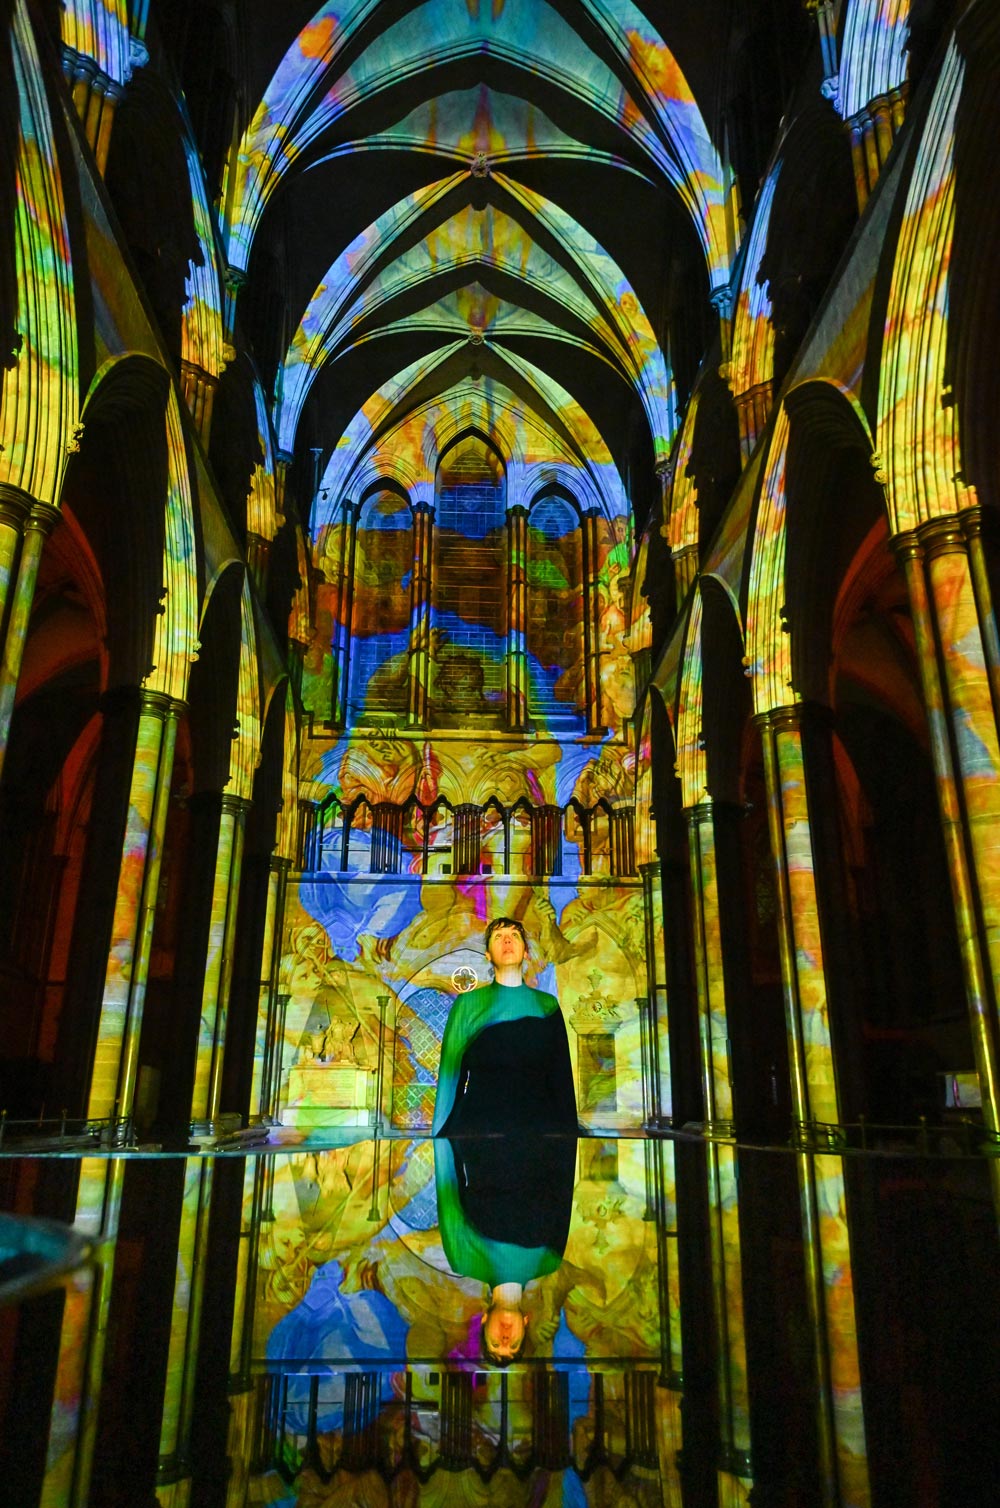 Sarum Lights – Renaissance by Luxmuralis lighting up the Cathedral Credit: Finbarr Webster